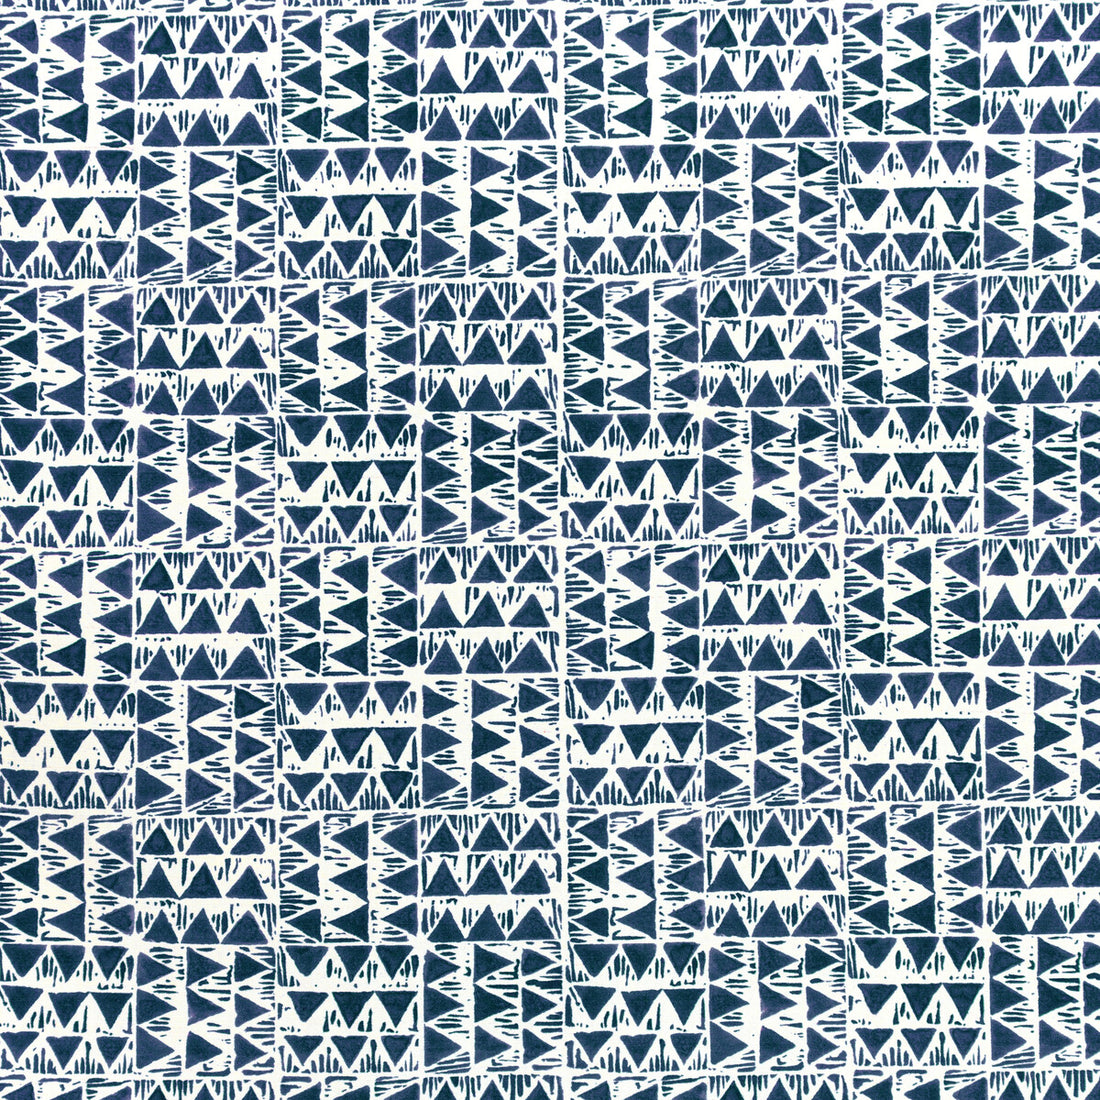 Yampa Print fabric in navy color - pattern 2020210.505.0 - by Lee Jofa in the Breckenridge collection